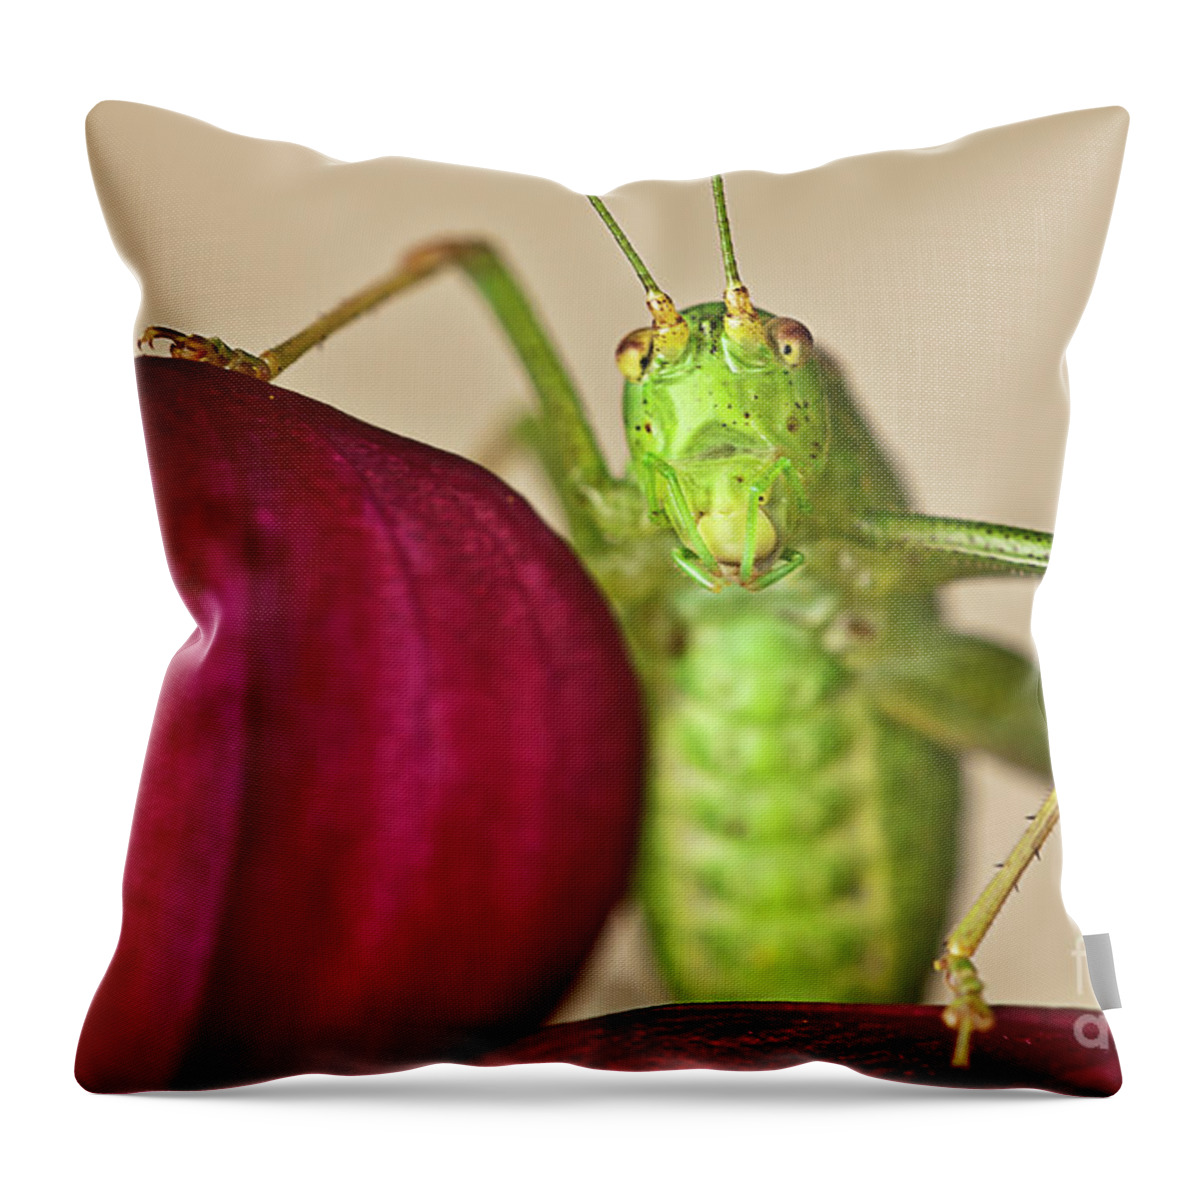 Macro Green Cricket Eyes Looking Portrait Red Flower Dahlia Insect Eye Contact Legs Whiskers Soft Delicate Vivid Color Beauty Alone Single Posing Elegant Elegance Handsome Figure Character Expressive Charming Singular Nature Beautiful Stylish Striking Solo Fantastic Solitary Lonely Lonesome Loner Pretty Delightful Serenity Enjoying Joy Stimulating Mysterious Surreal Creative Funny Fantasy Weird Imaginary Aesthetic Eccentric Grotesque Bizarre Peculiar Acquaintance Appearance Face Meet Talk Simple Throw Pillow featuring the photograph A Conversation-standing Up Cricket On Red Dahlia Flower Asking Who Are You? Let's Talk Real Macro #1 by Tatiana Bogracheva